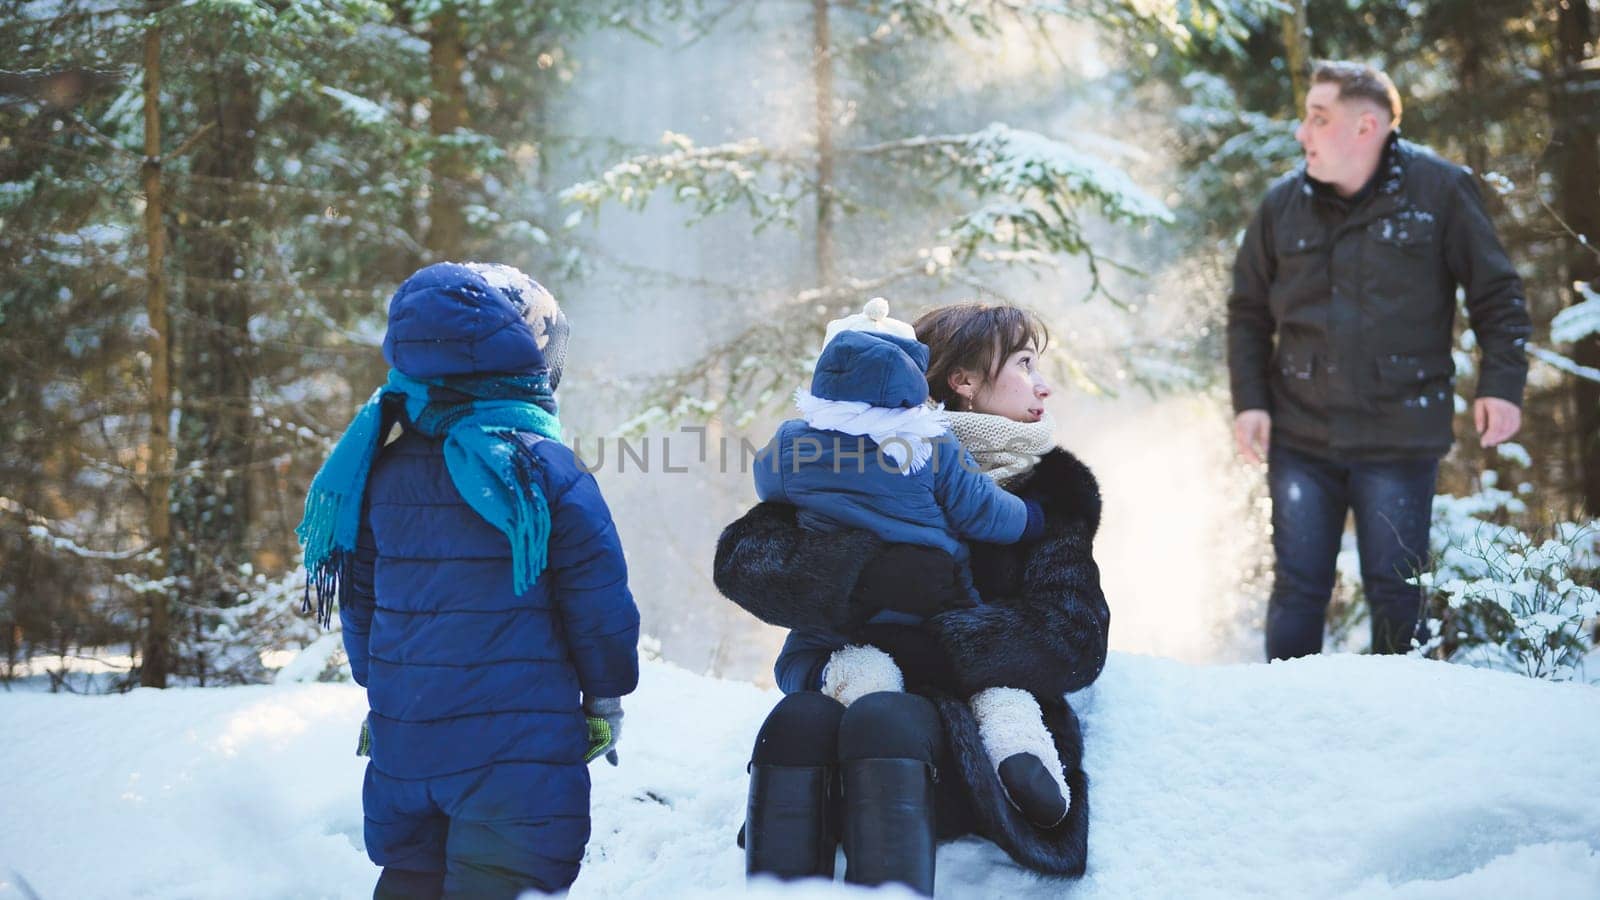 A happy family enjoying a winter sunny day in the woods